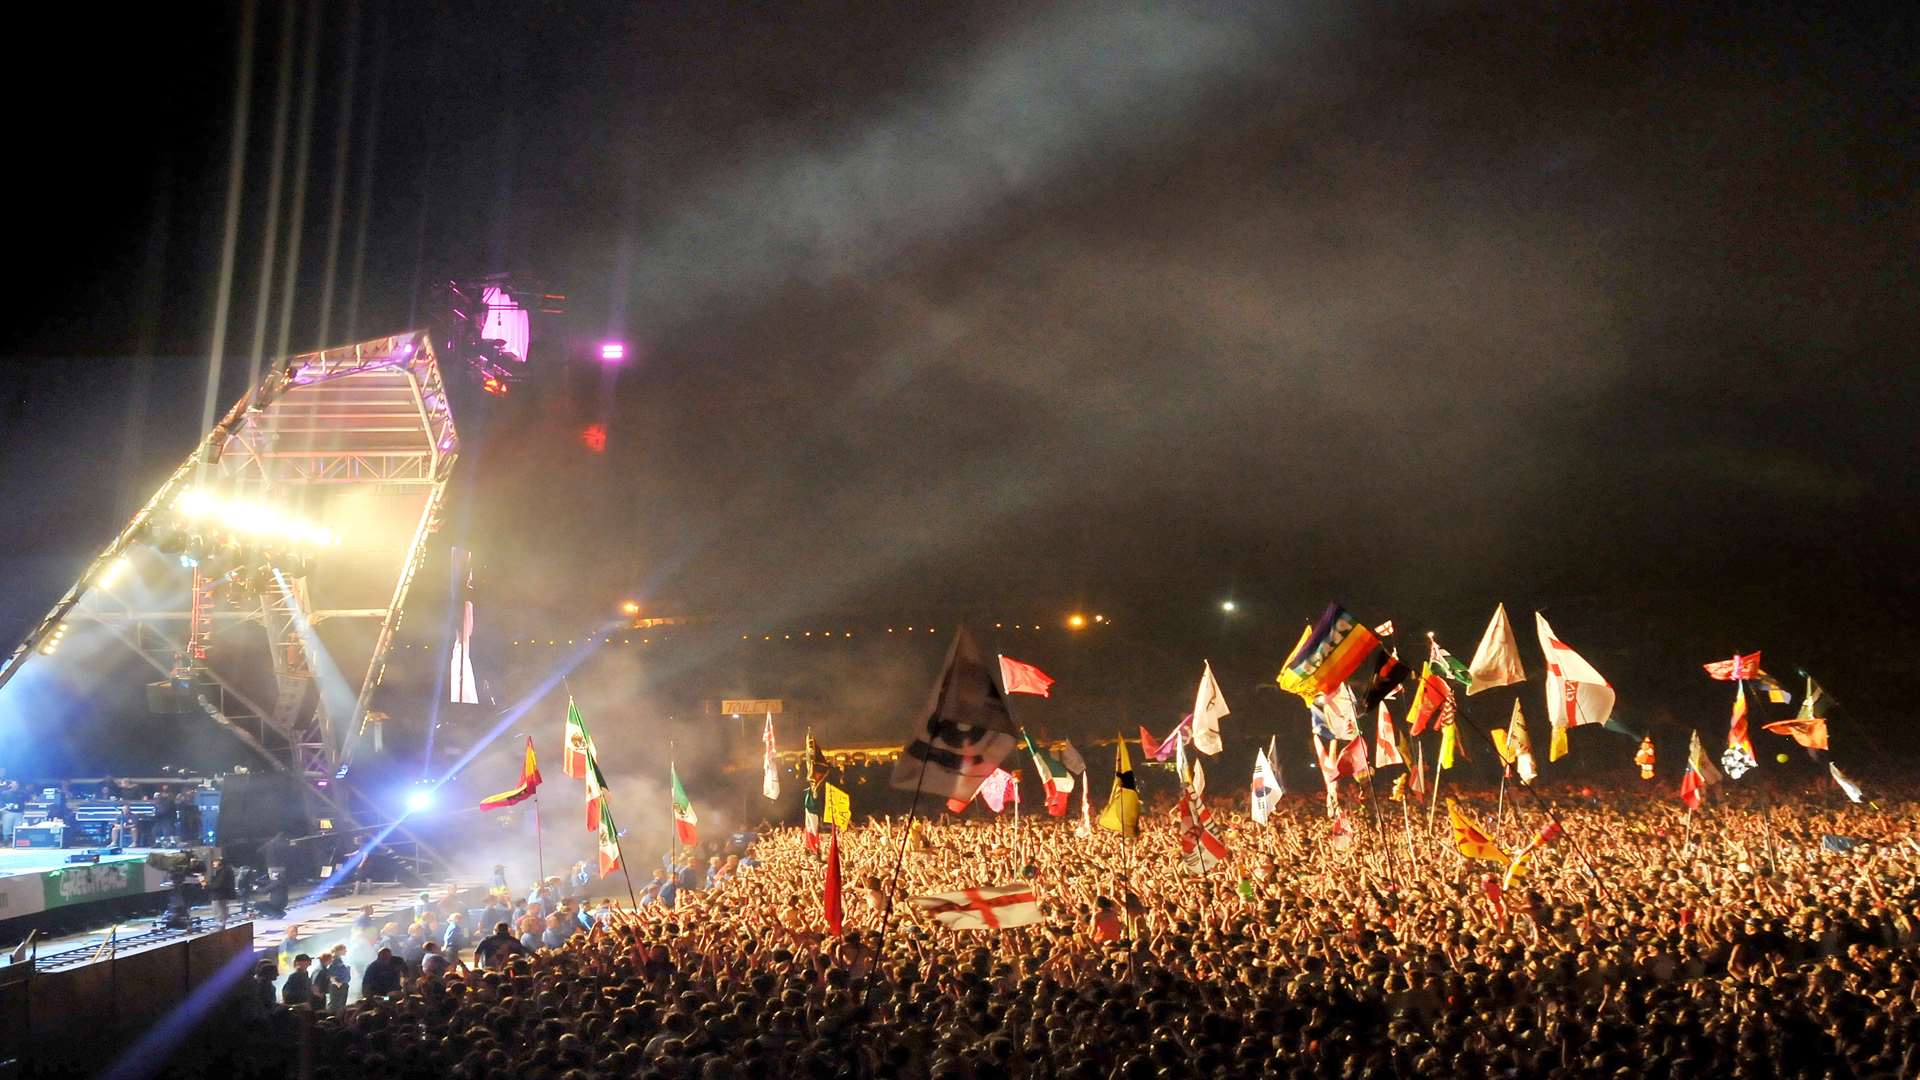 Glastonbury tickets were among freebies given to MPs